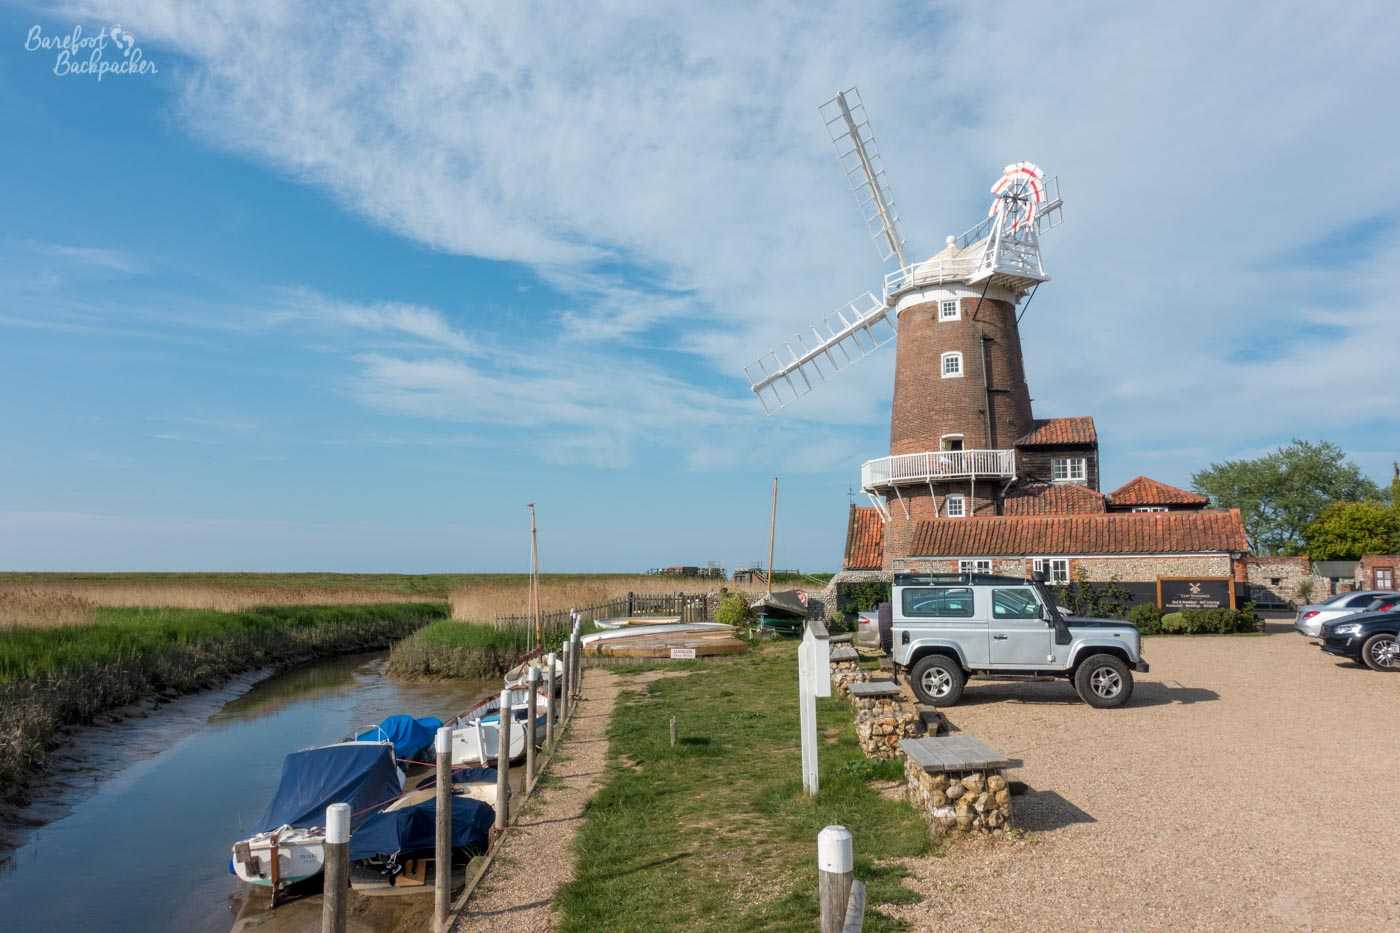 A small light brown brick windmill is on the right of the image, with white sails. On the left is a small muddy river. Behind are fields of long grasses. In front is a small car park with a 4x4 and a couple of cars in it. Between the car park and the river are a couple of boats. It is a blue sky with wispy light cloud.